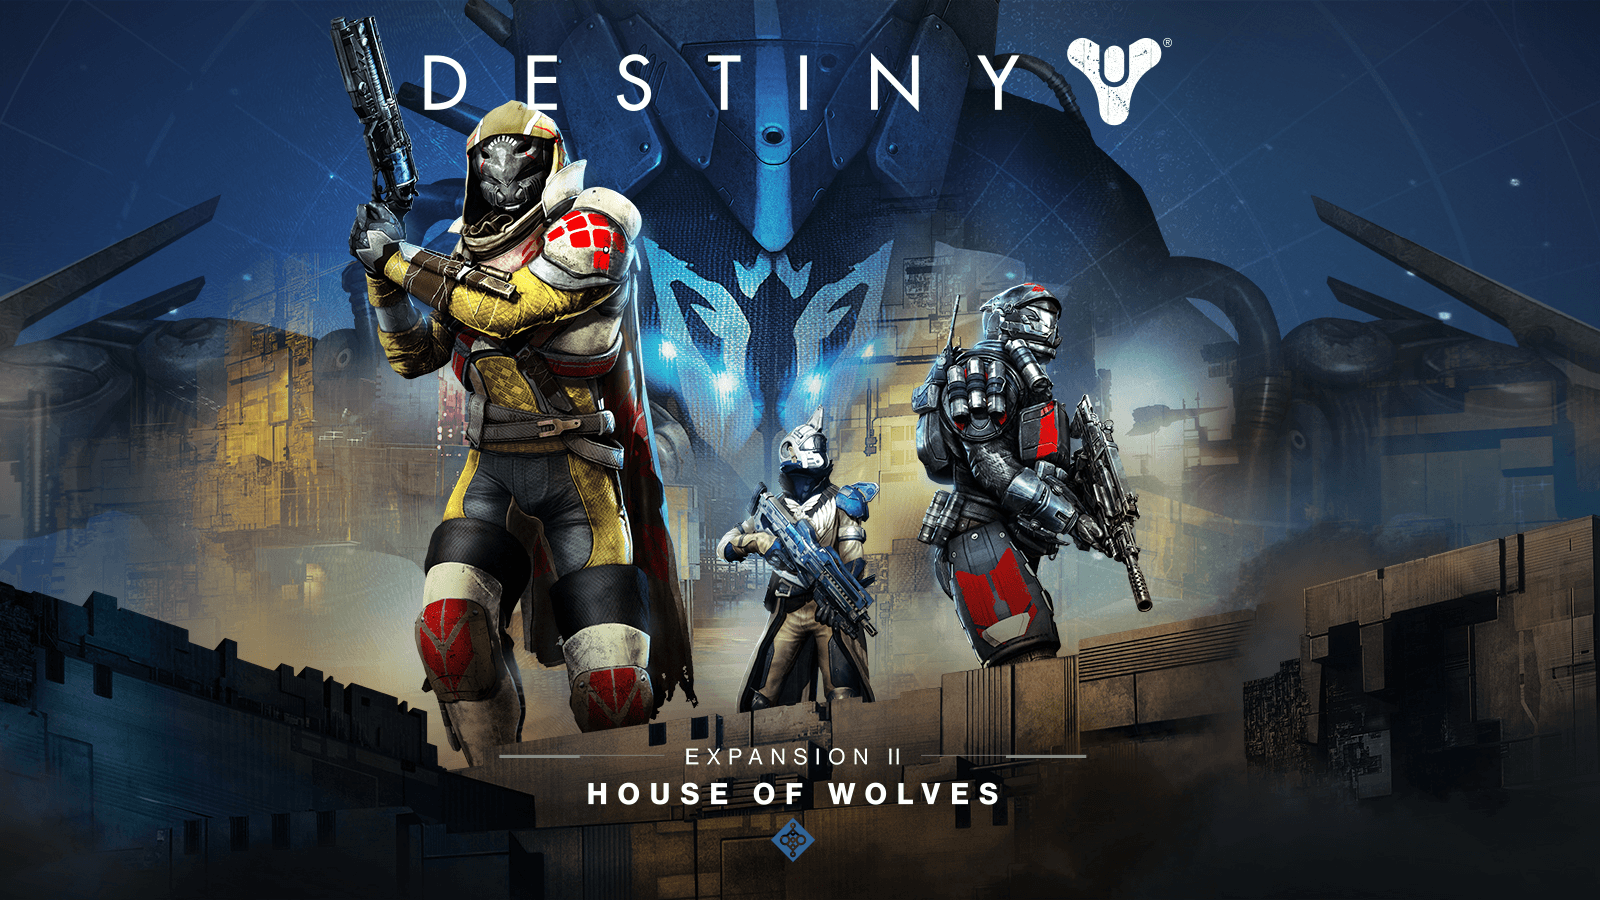 House of Wolves Destiny Logo - Destiny Expansion II: House of Wolves Game